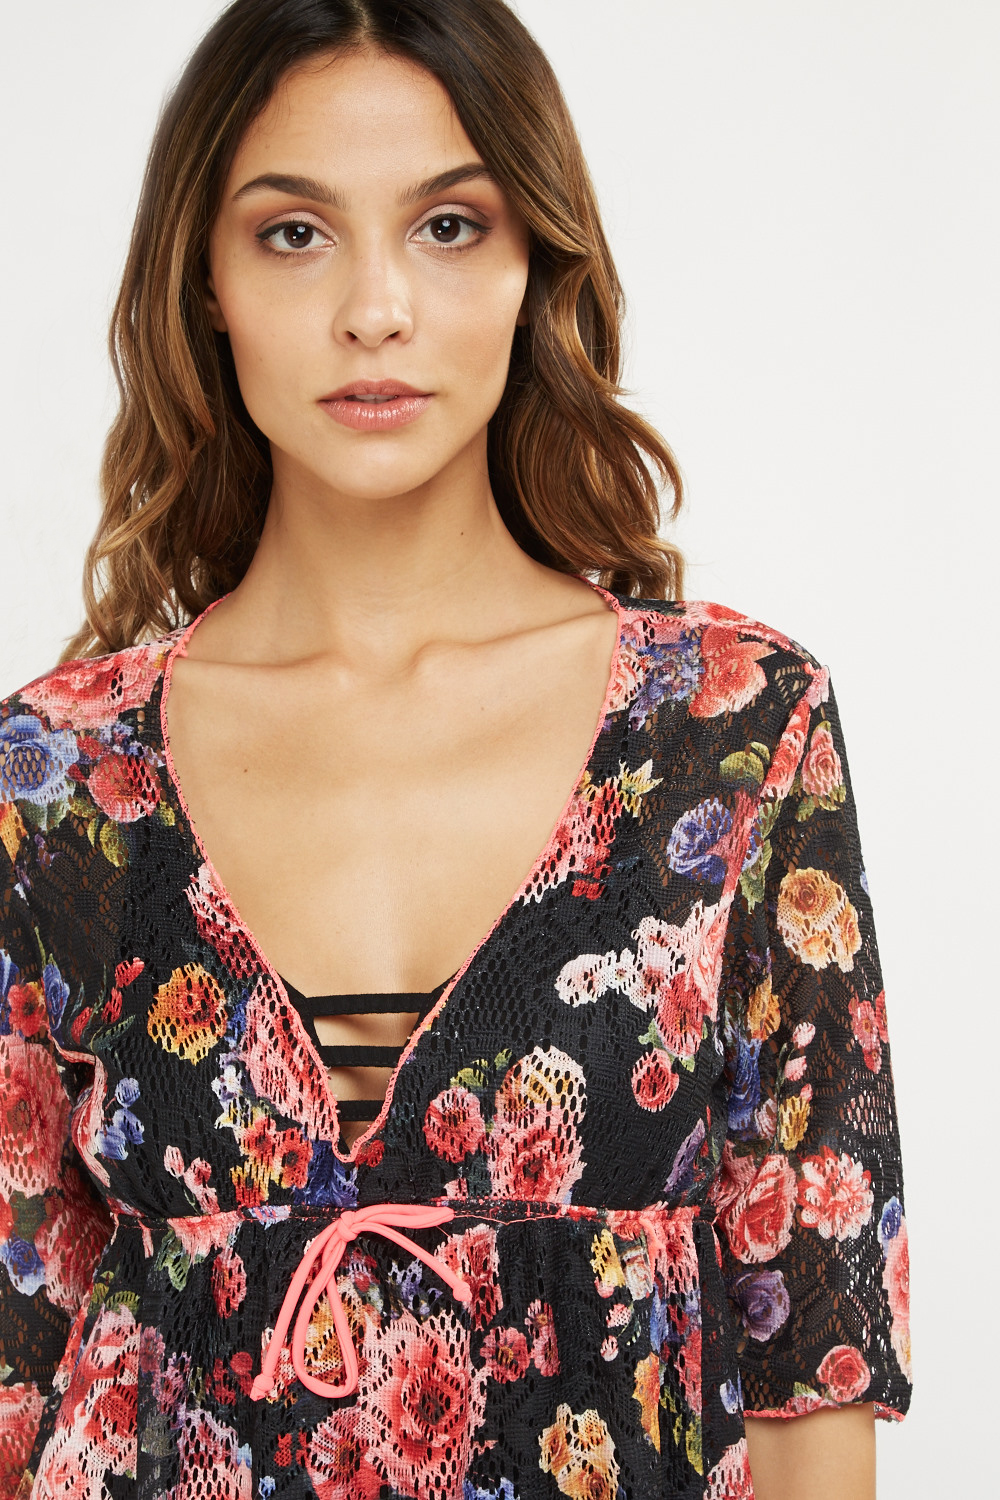 Mesh Floral Cover Up Dress - Just $3